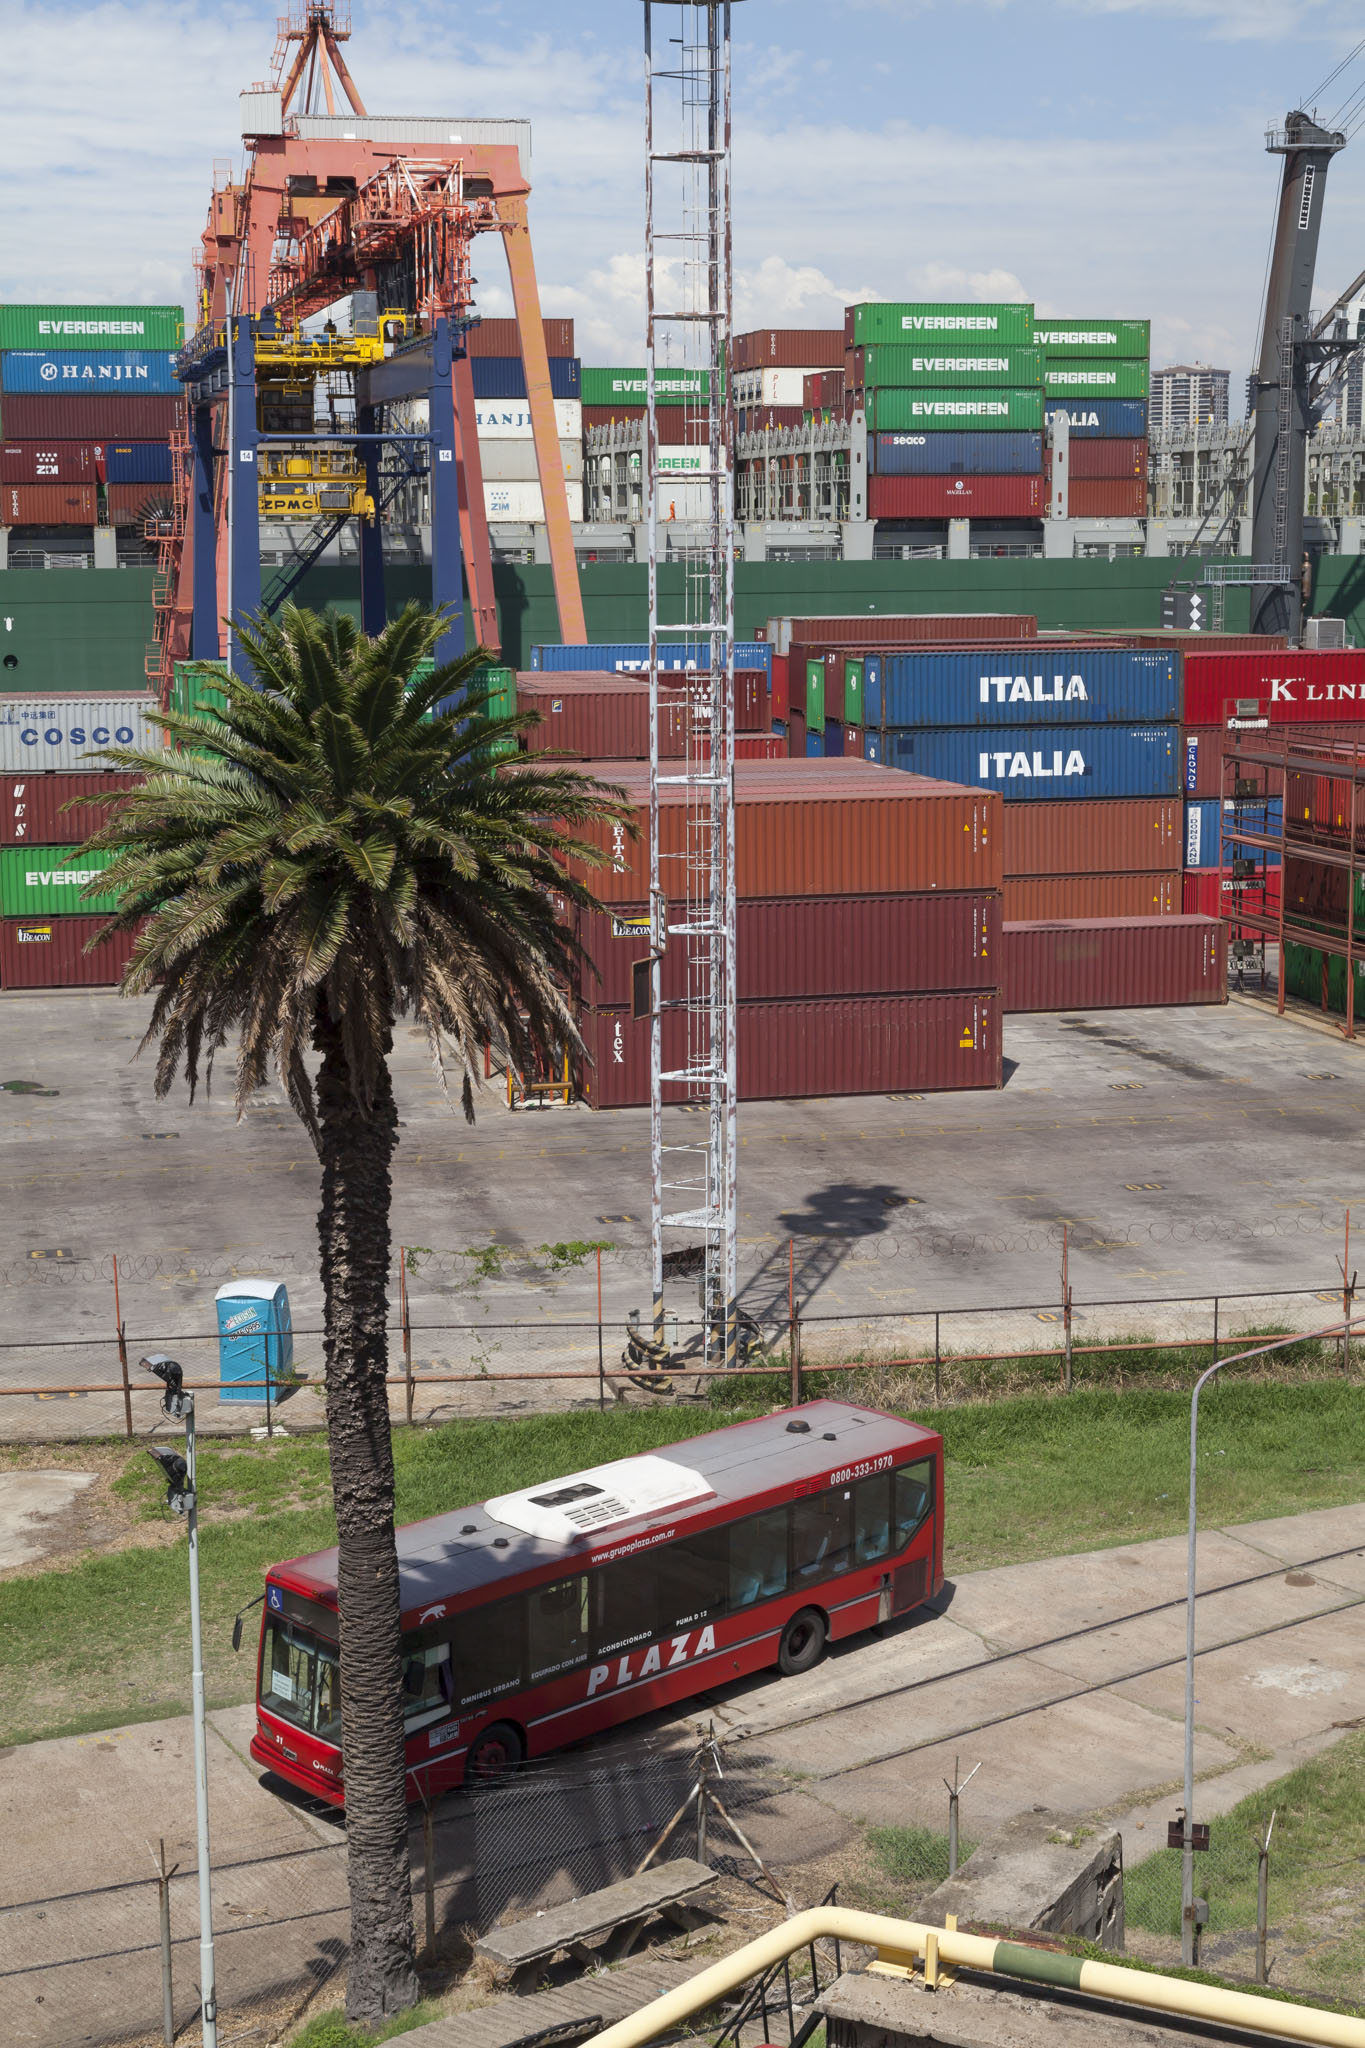 Buenos Aires Port